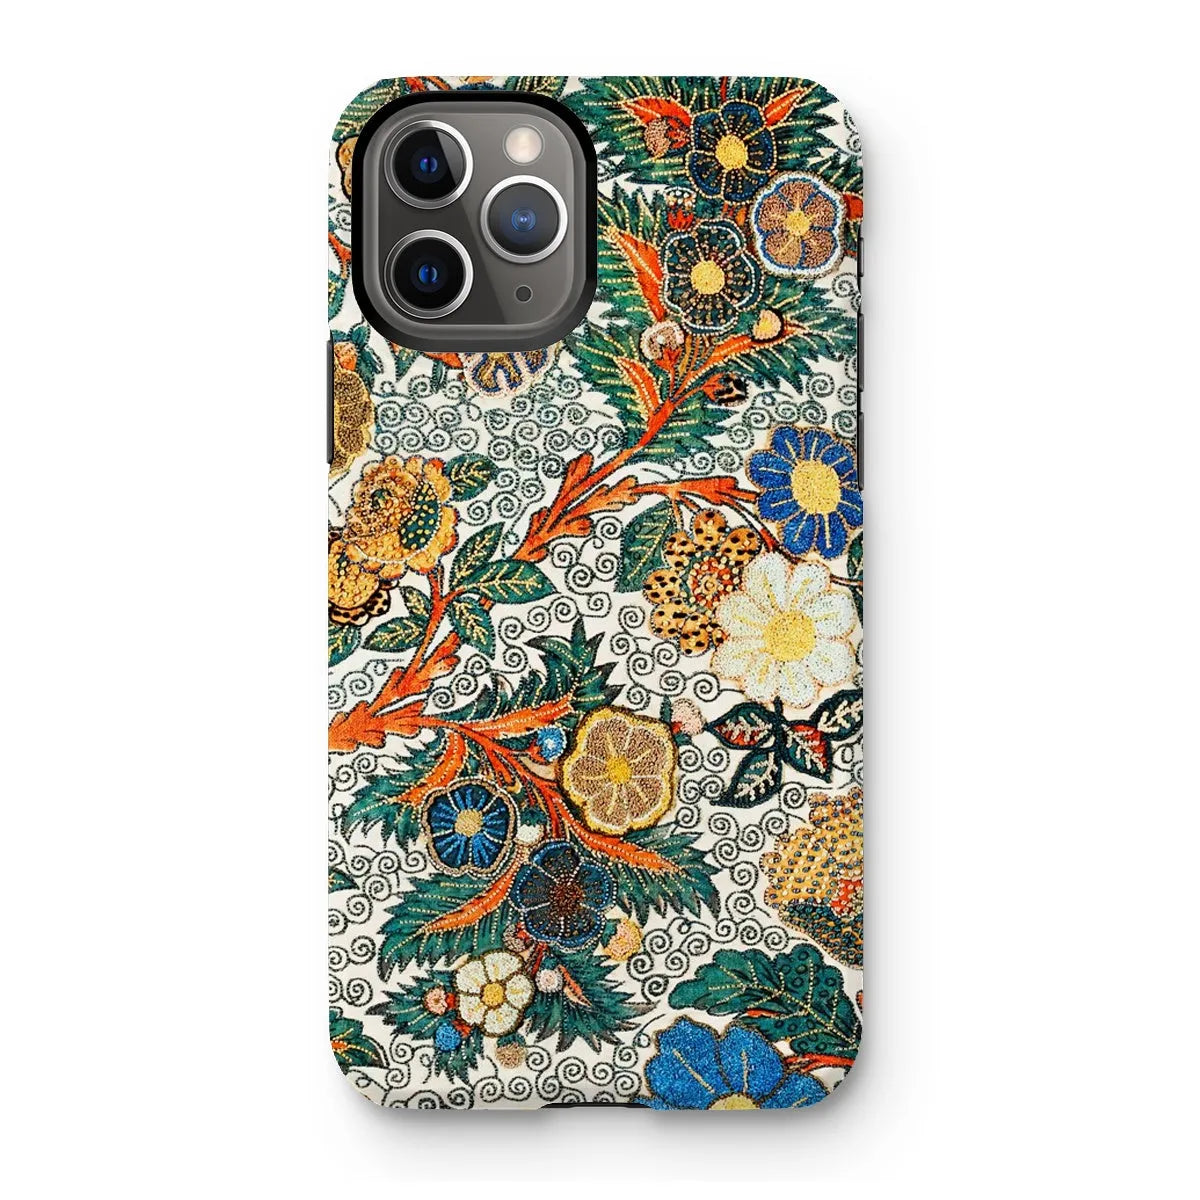 Blossomewhere Japanese Tapestry Art Phone Case - Iphone 11 Pro / Matte - Mobile Phone Cases - Aesthetic Art